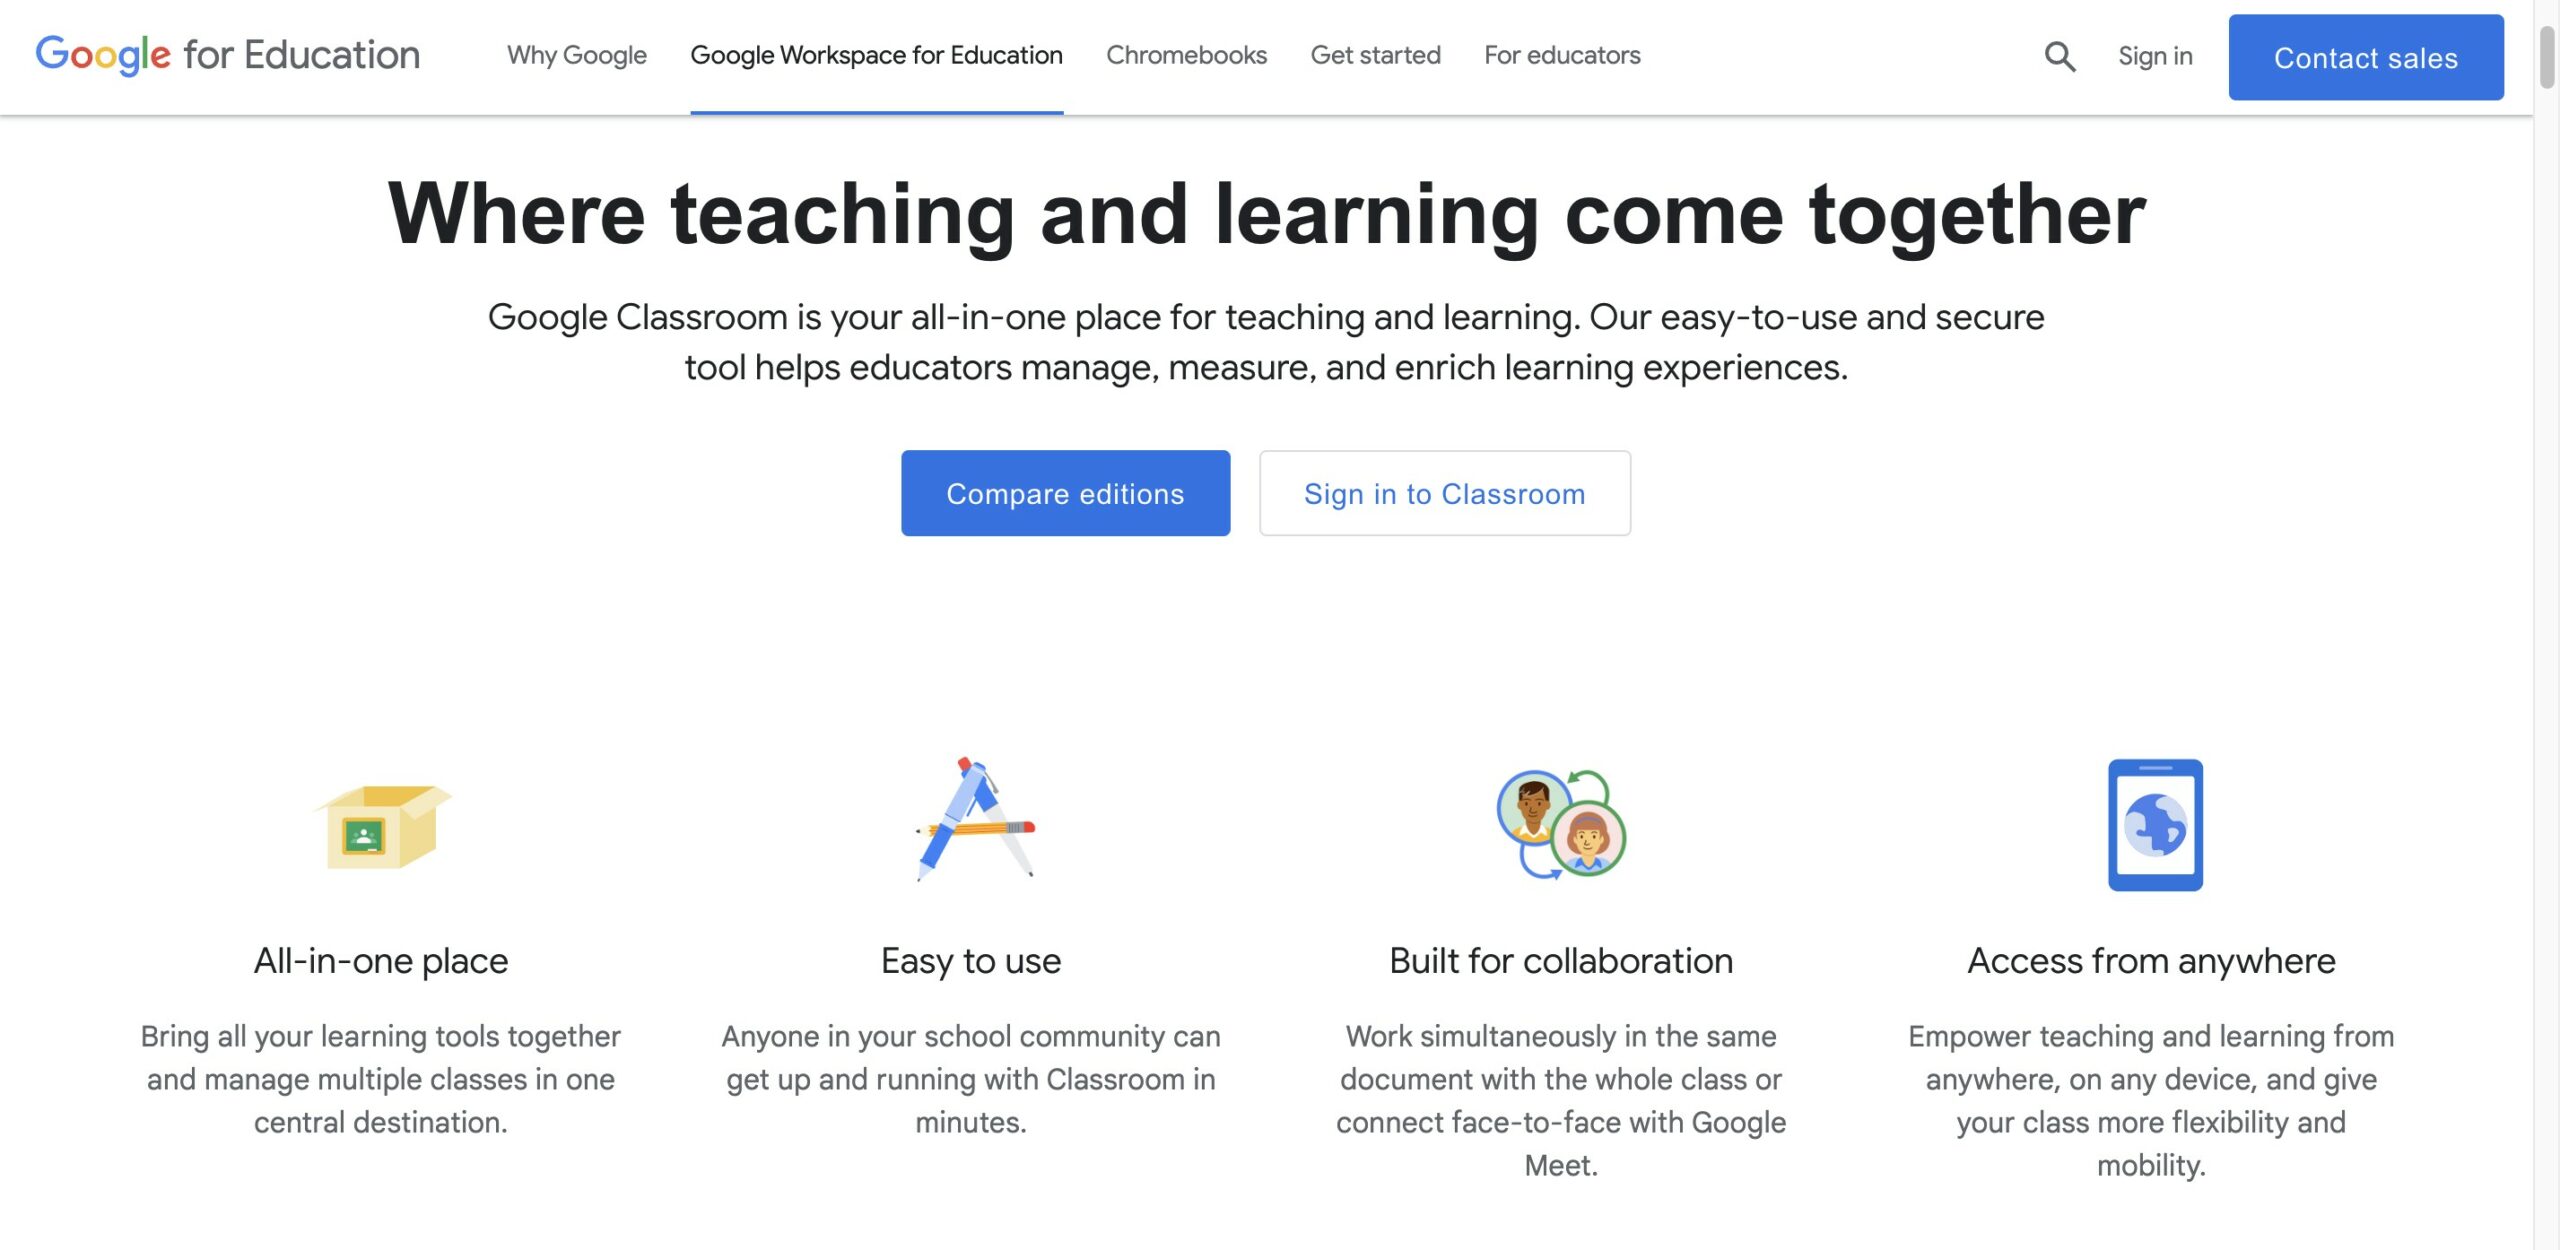 What is the best feature of Google Classroom? Ostado-tutoring website